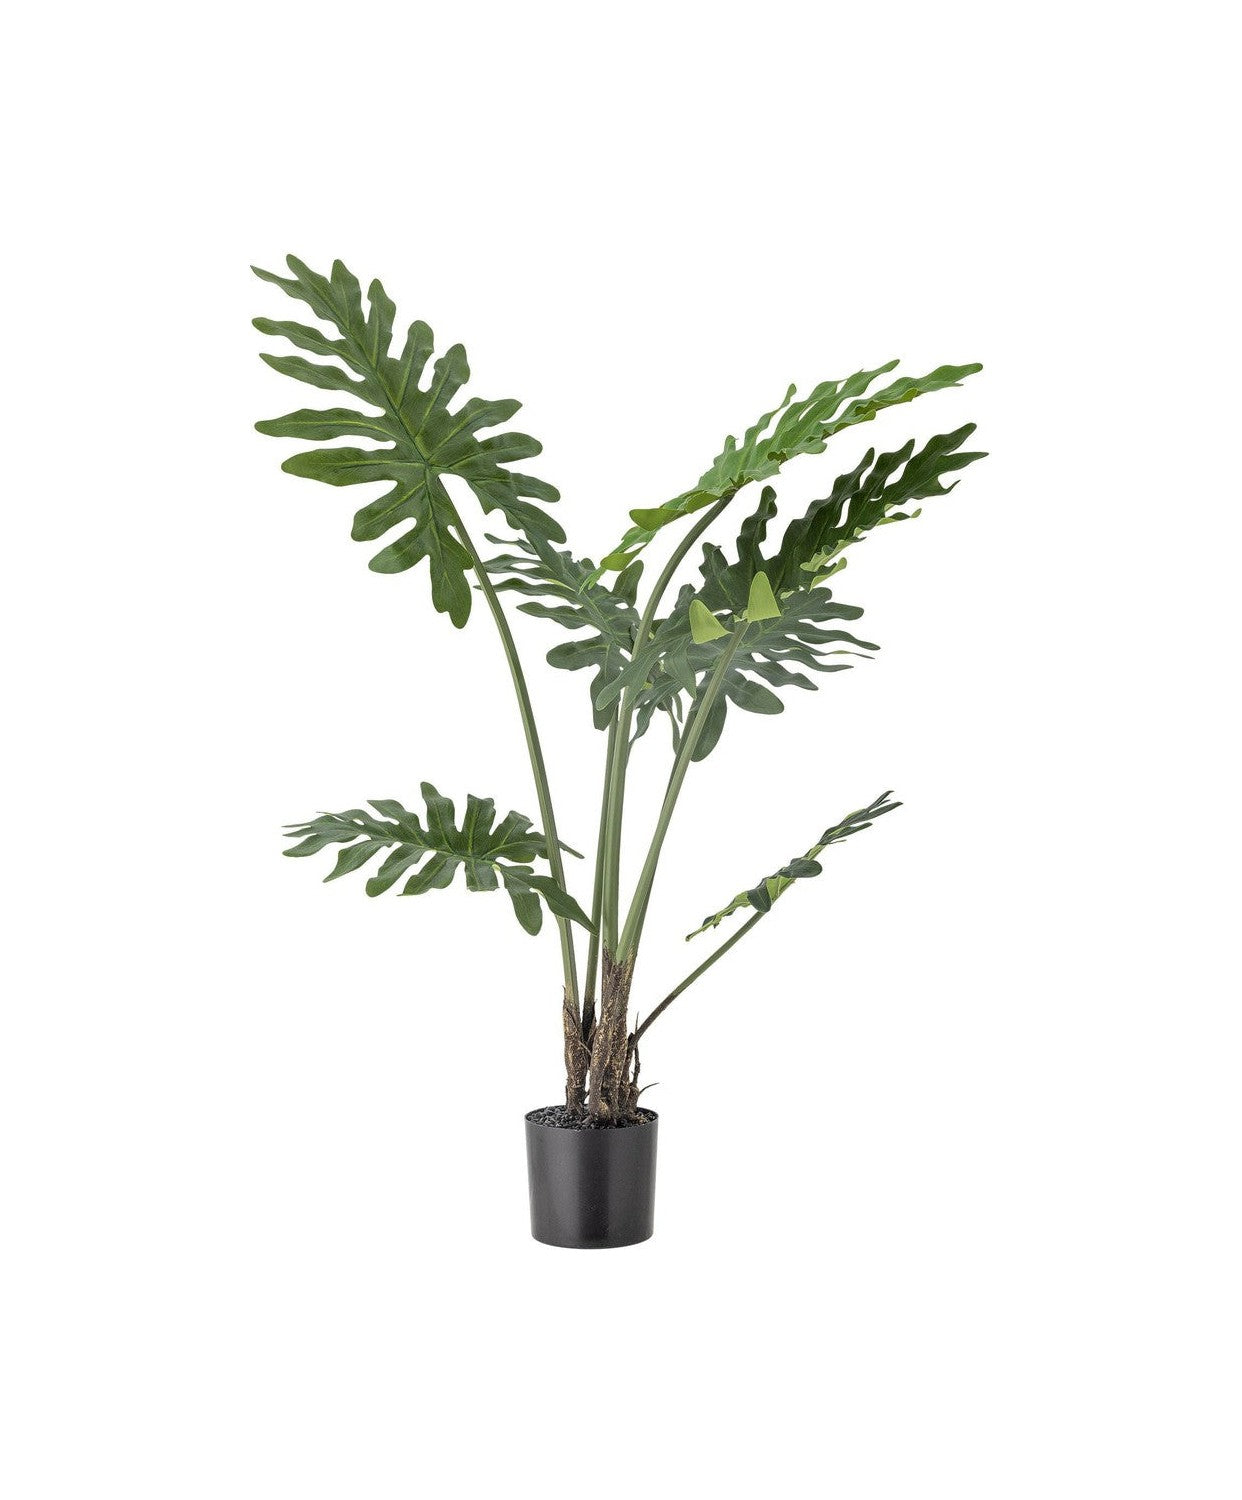 Bloomingville Philodendron Artificial Plant, Green, Plastic